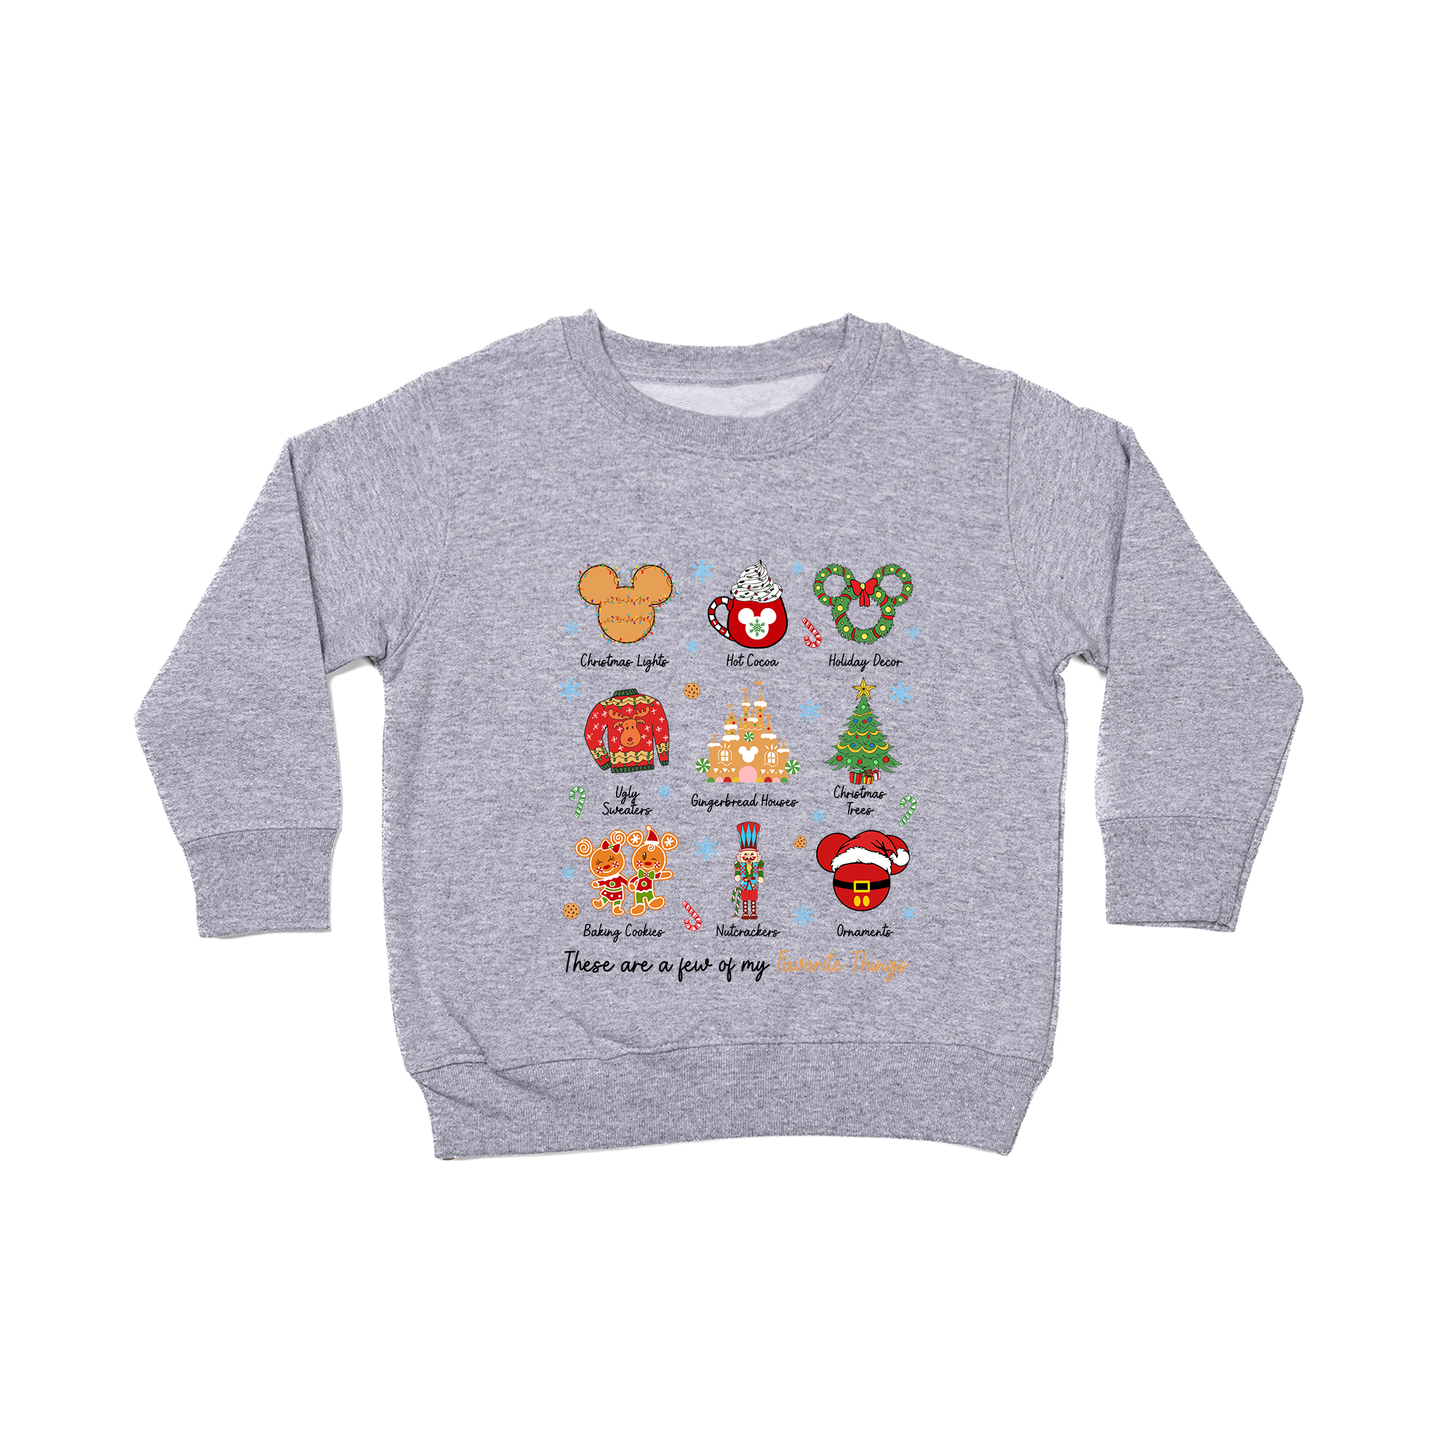 These Are A Few of My Favorite Things (Christmas Magic Mouse) - Kids Sweatshirt (Heather Gray)